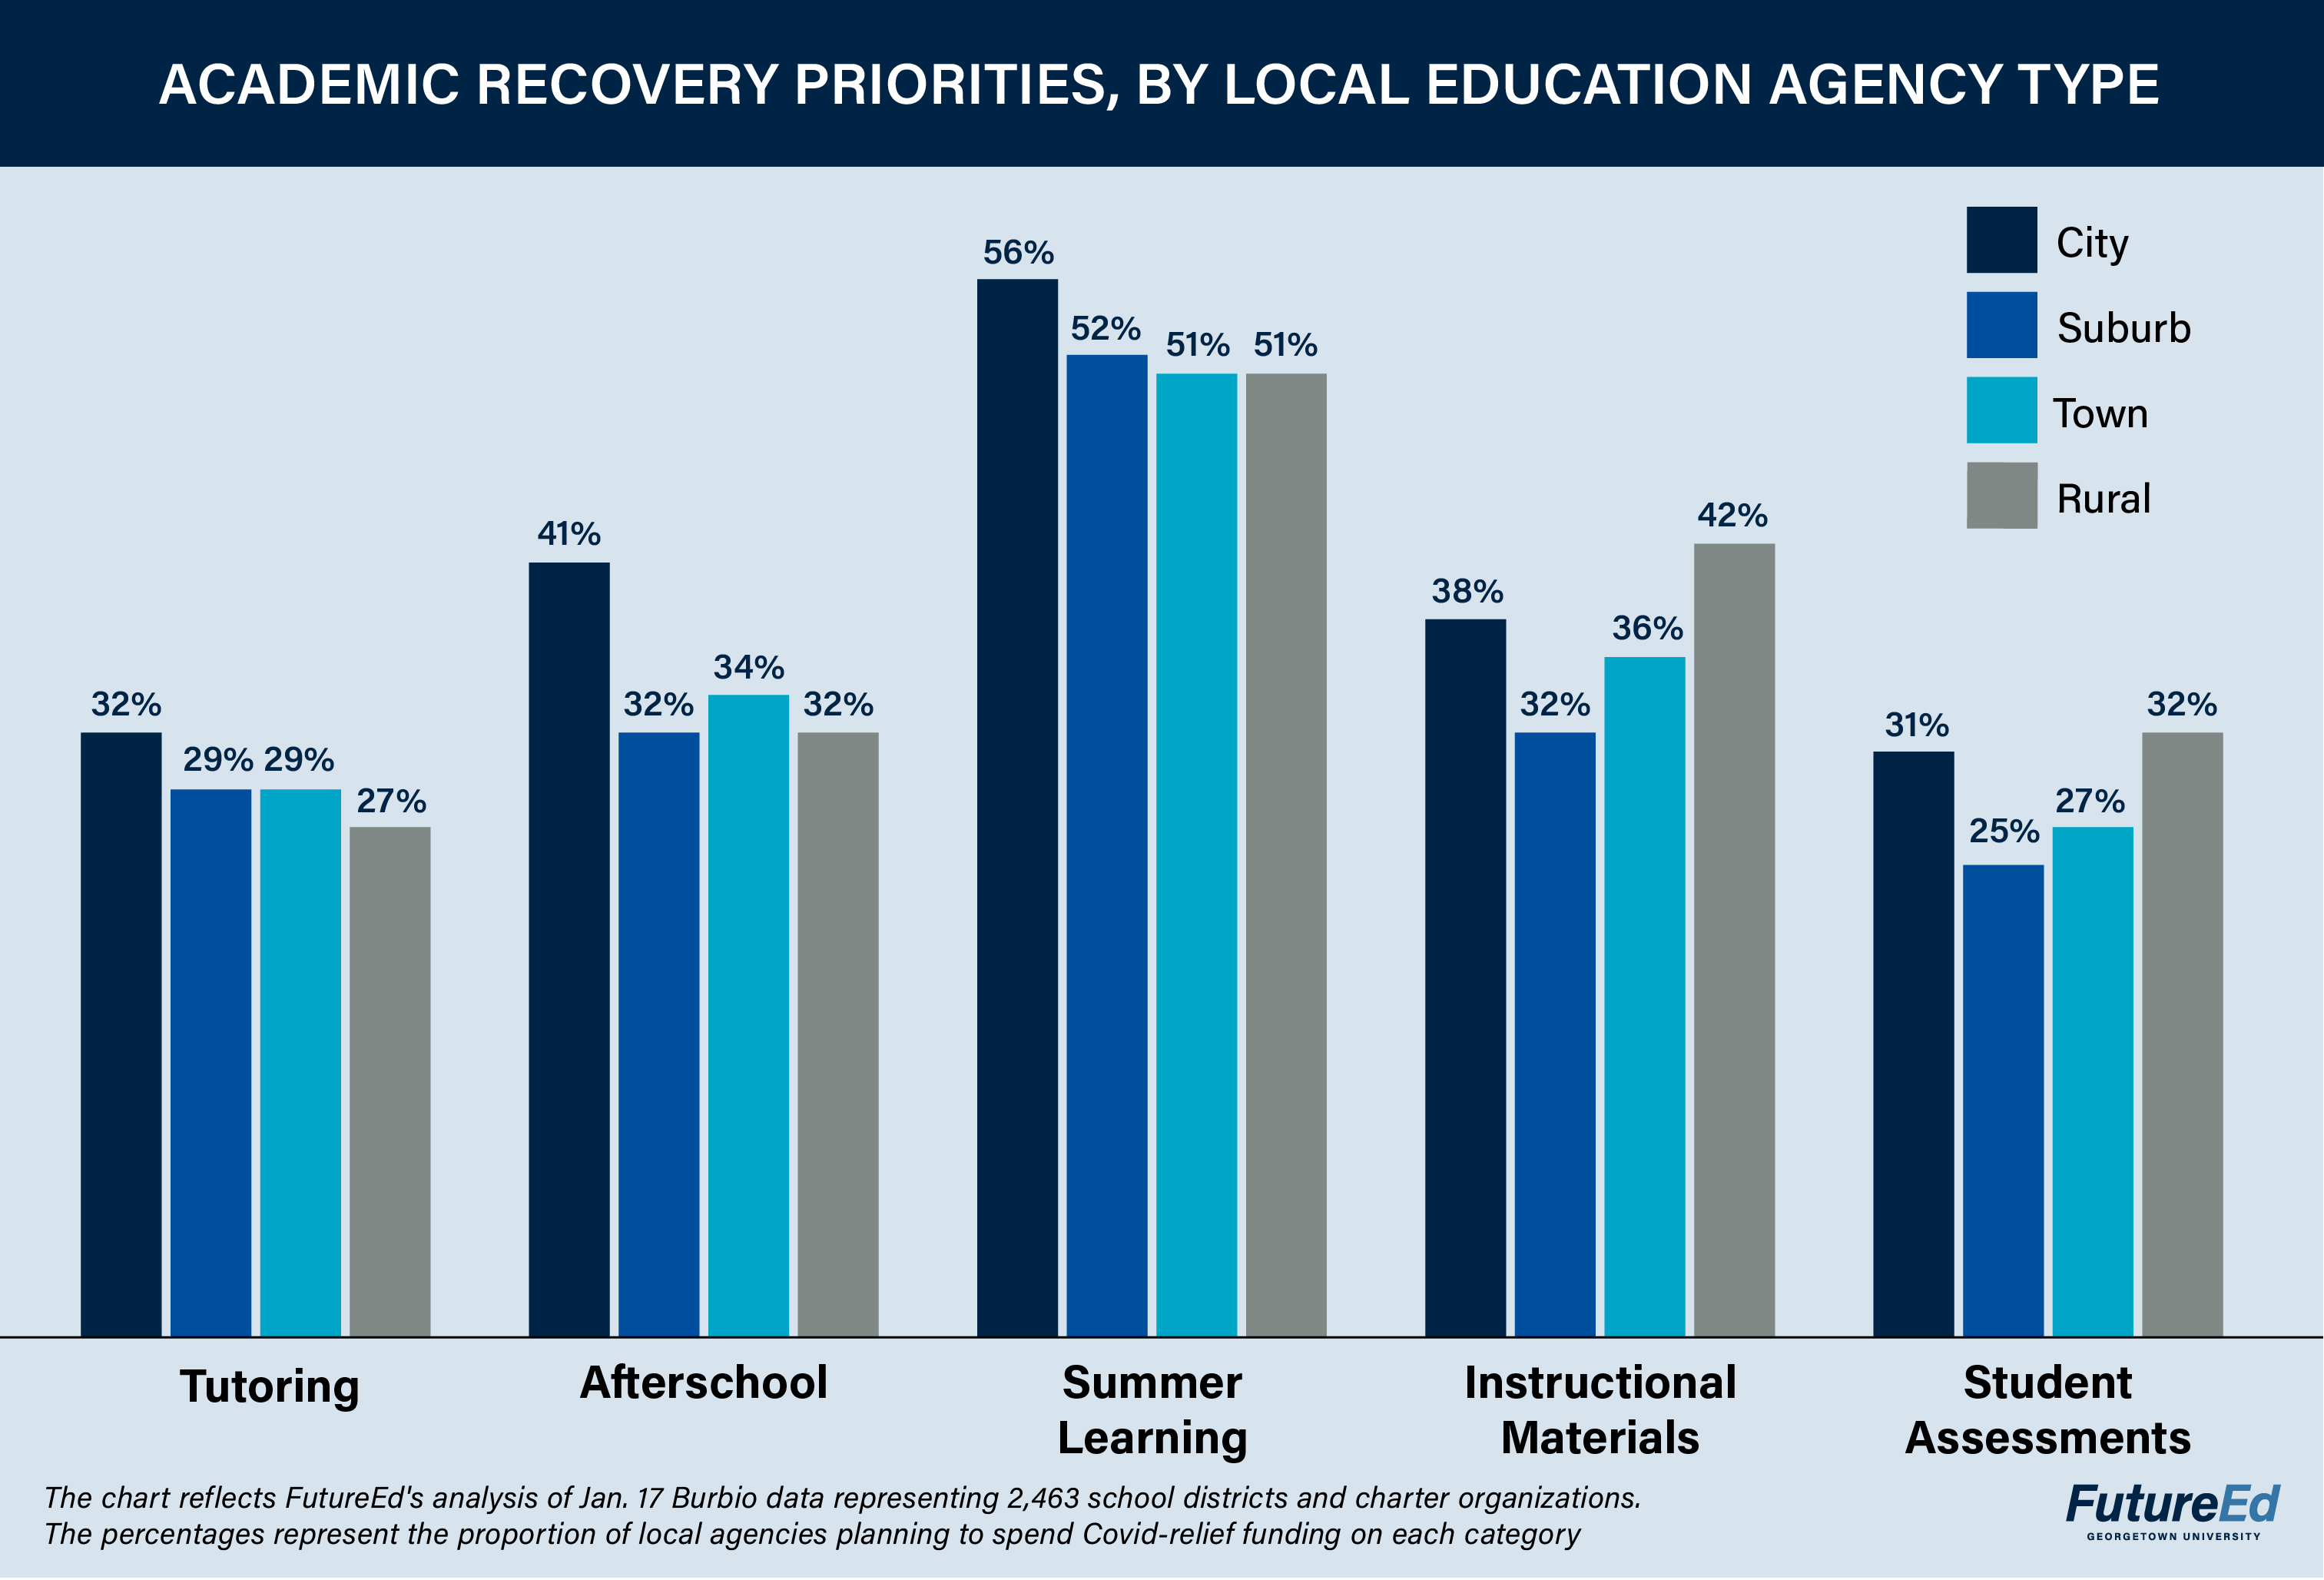 Academic Recovery Priorities by Local Education Agency Type